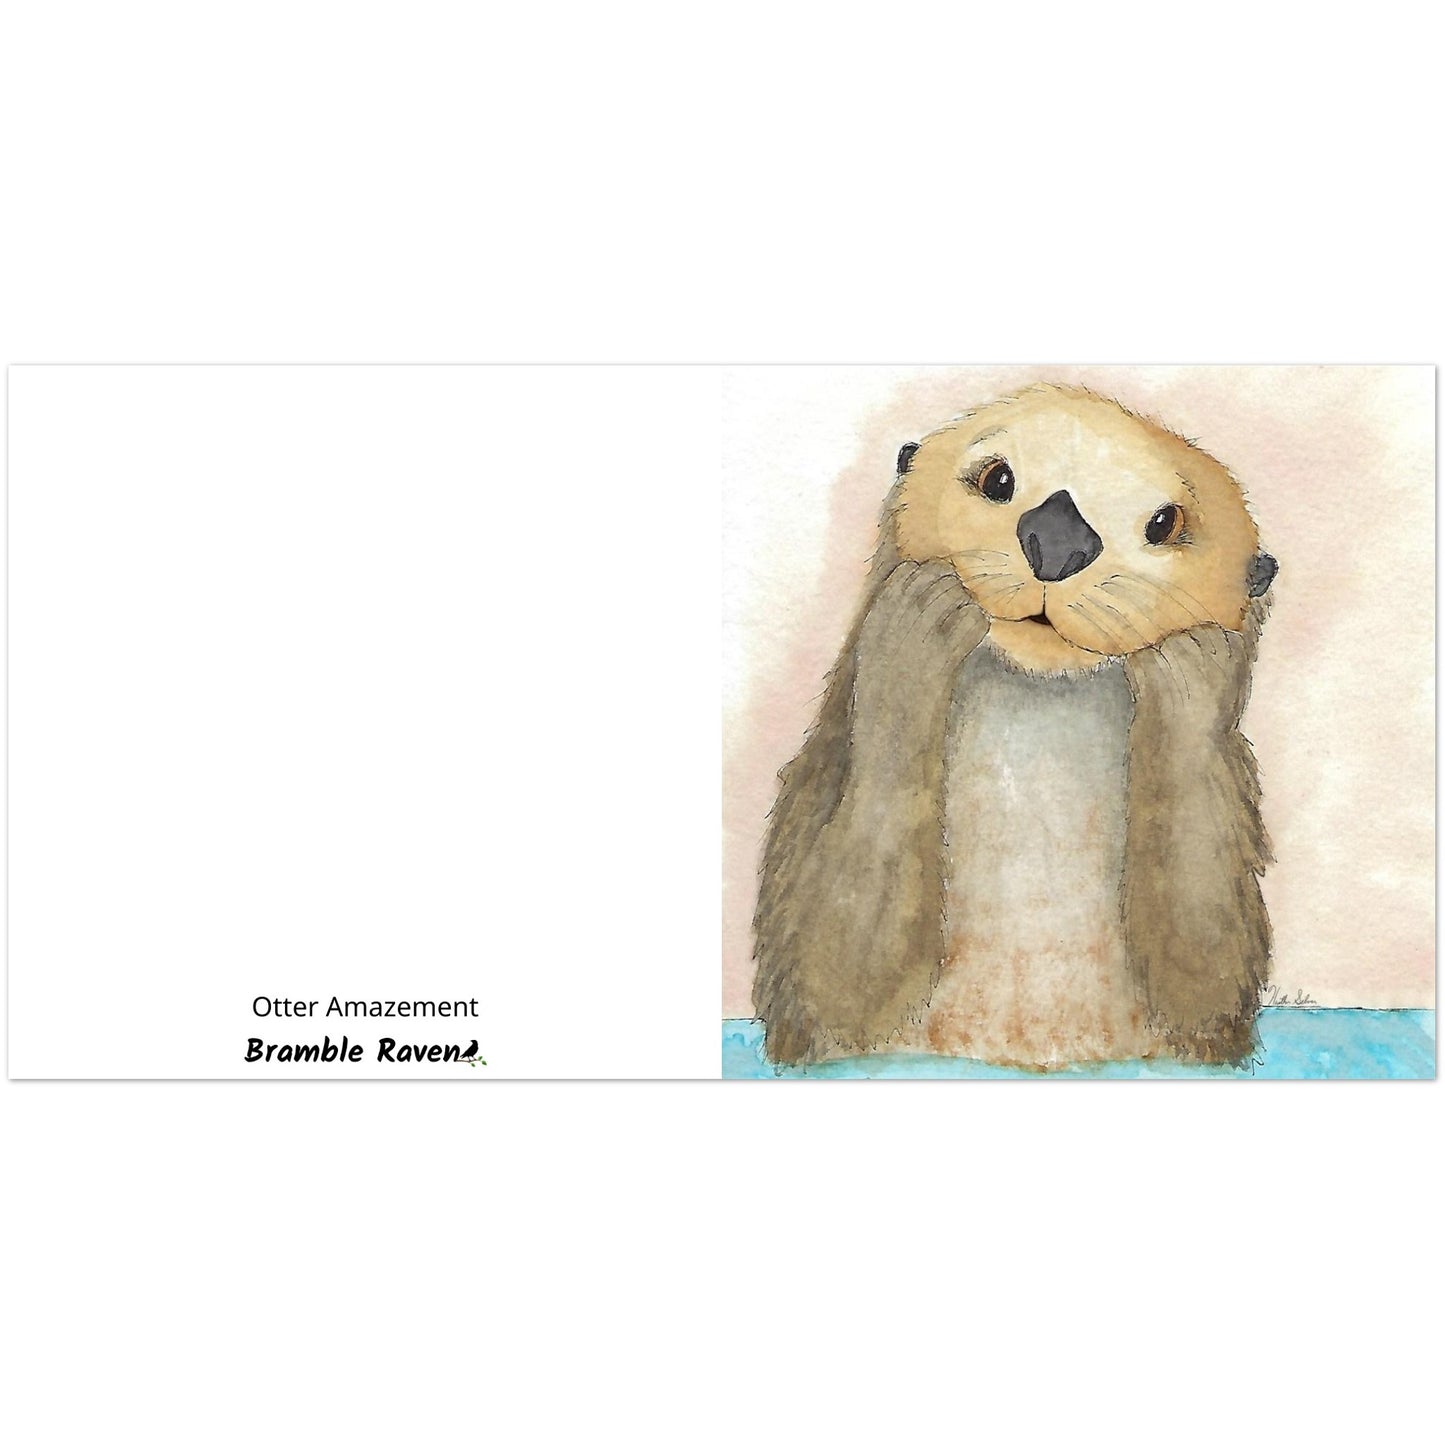 Pack of ten 5.25 x 5.25 inch greeting cards. Features watercolor print of a playful sea otter on the front. Inside is blank. Made of coated paperboard. Comes with envelopes.